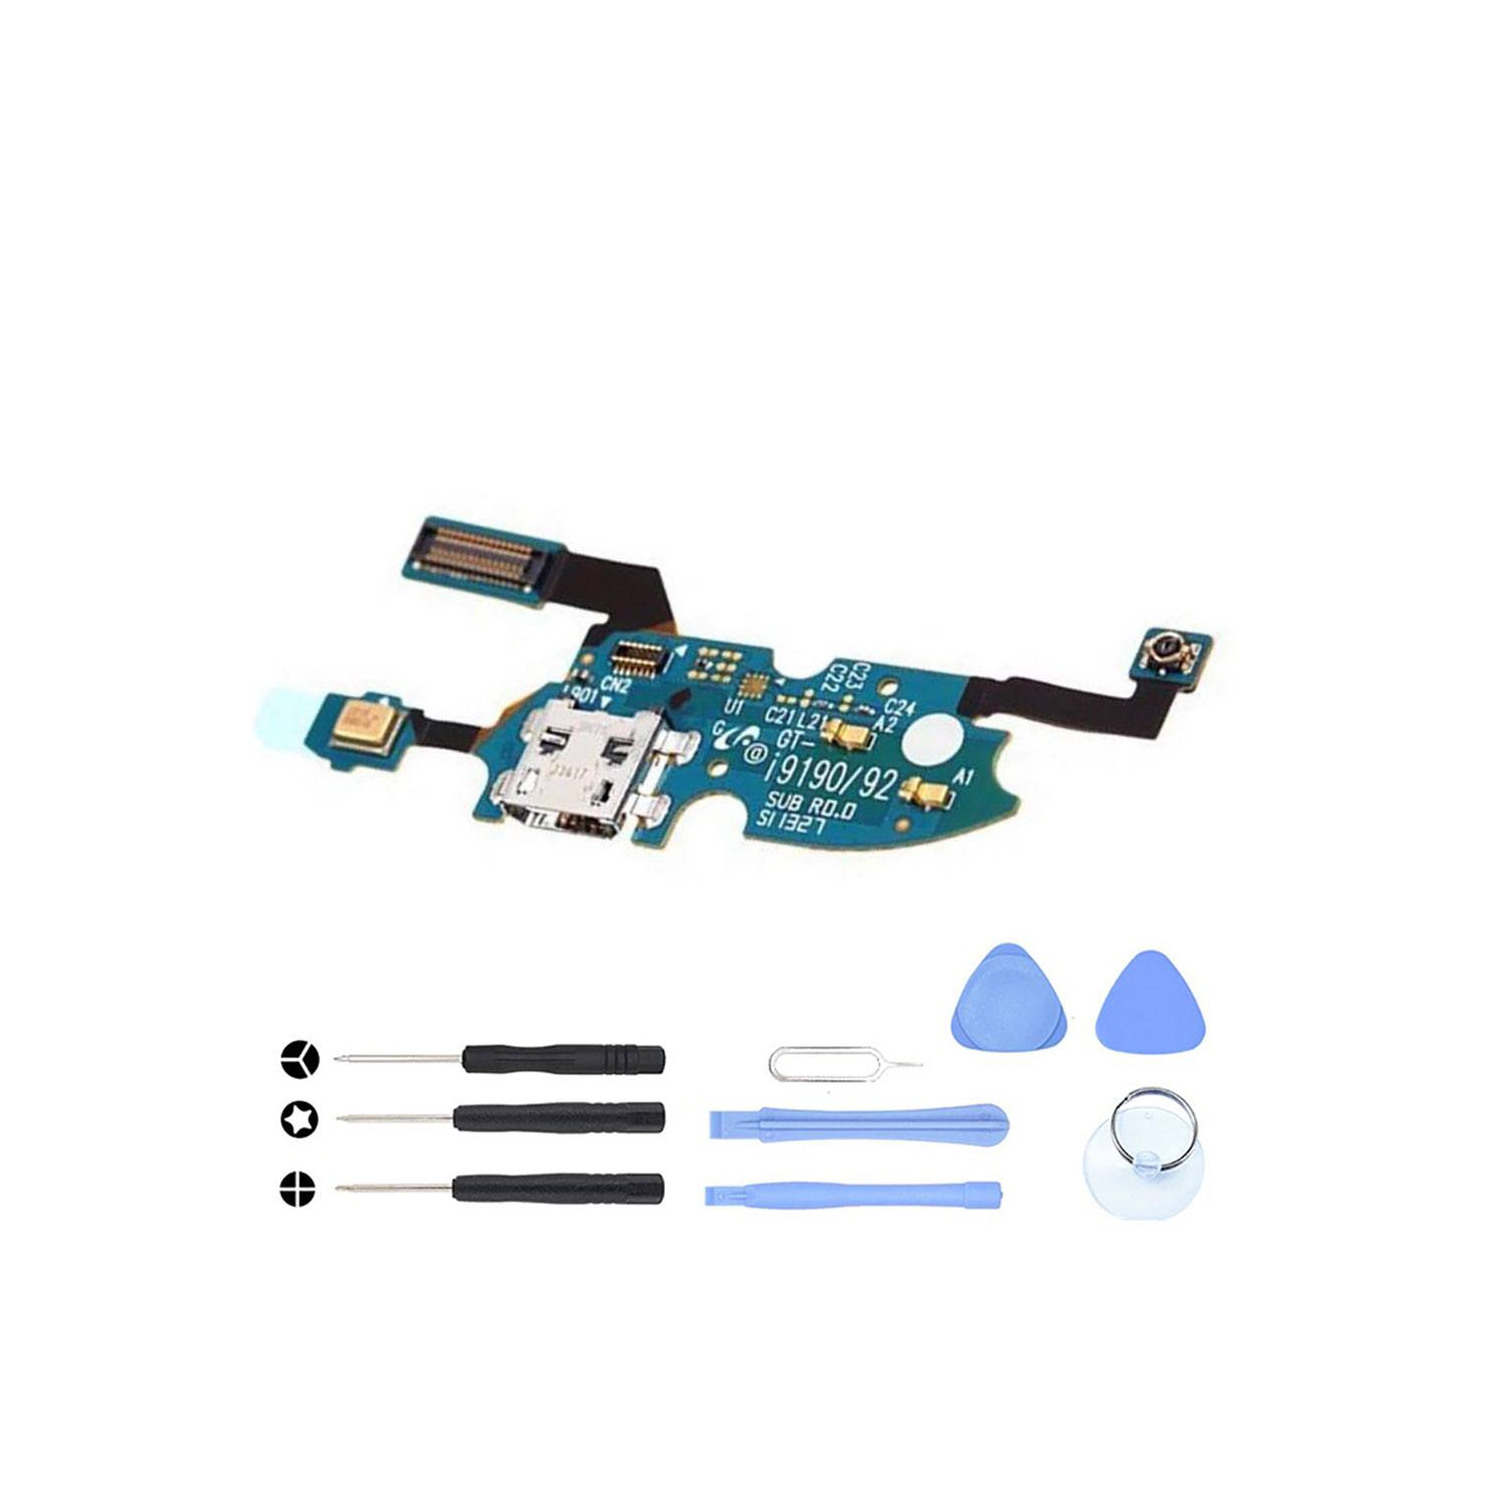 Charging port flex cable with microphone for Samsung Galaxy S4 Mini GT-I9195